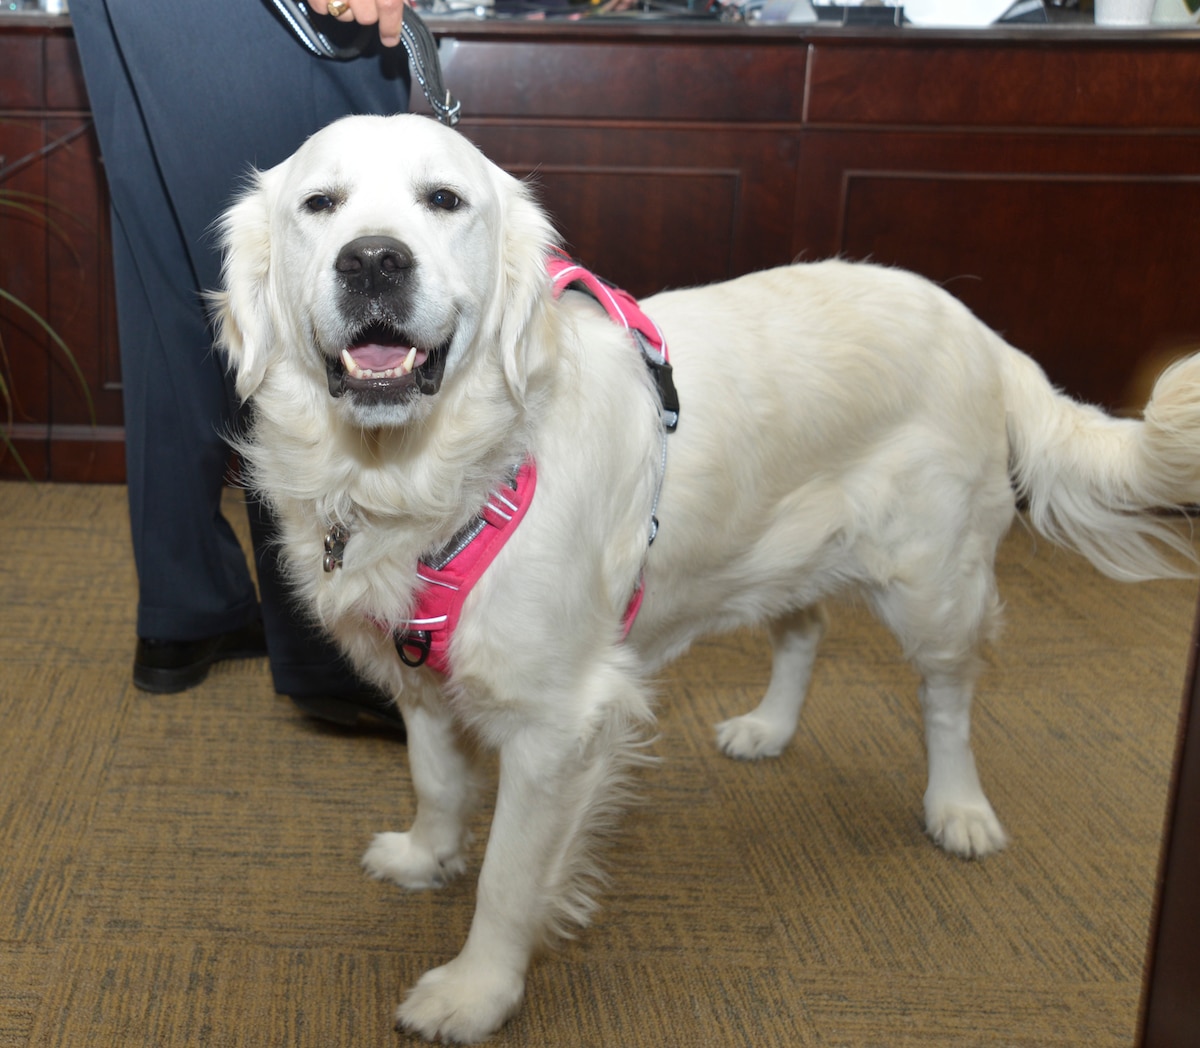 16th Air Force therapy dog, Bindi Lou, is ready to meet her next new friend. “There has been a lot of effort and thought put into establishing the 16 AF Therapy Dog Program -- not the least of which was to make it a formal and repeatable process for other units to emulate,” said Carlos Bushman, Bindi’s handler.